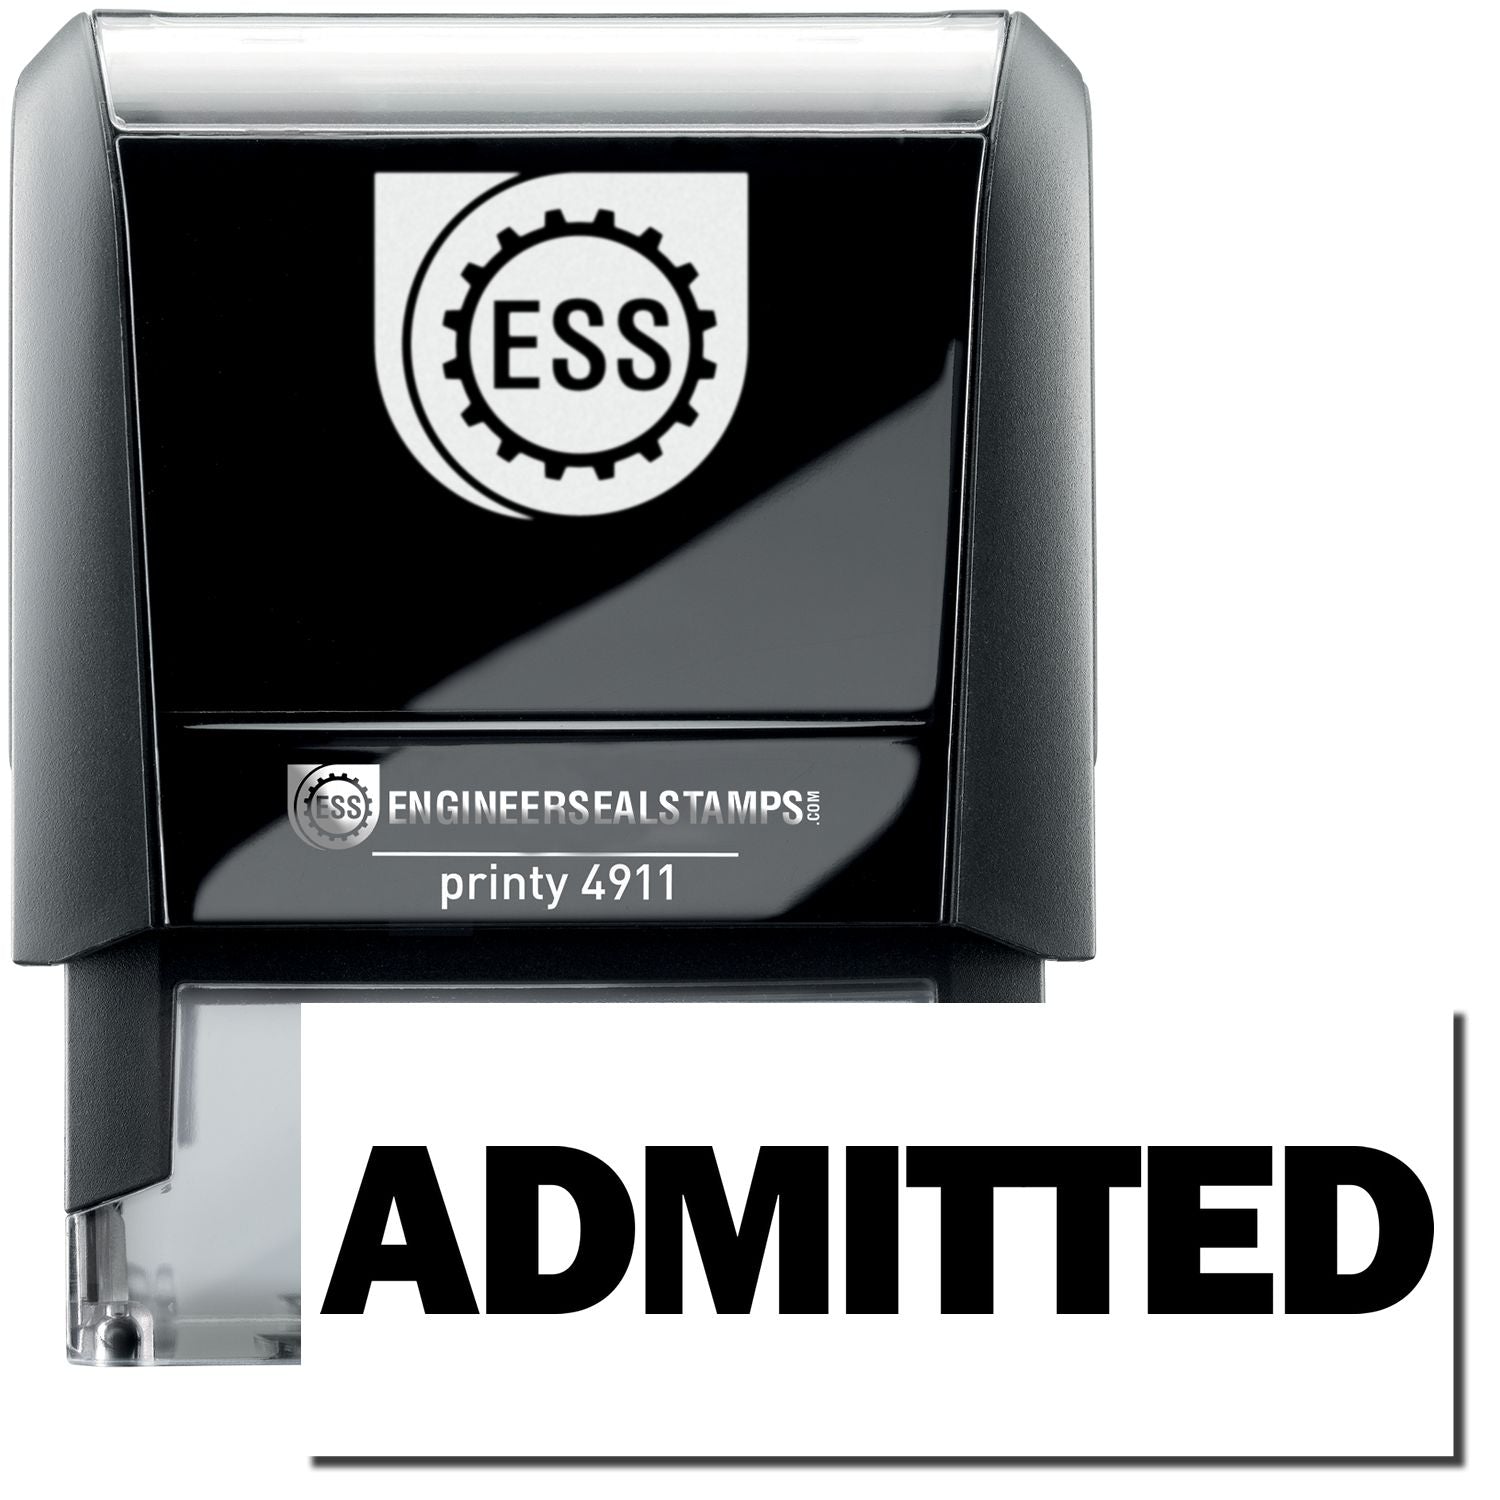 A self-inking stamp with a stamped image showing how the text "ADMITTED" in bold font is displayed after stamping.